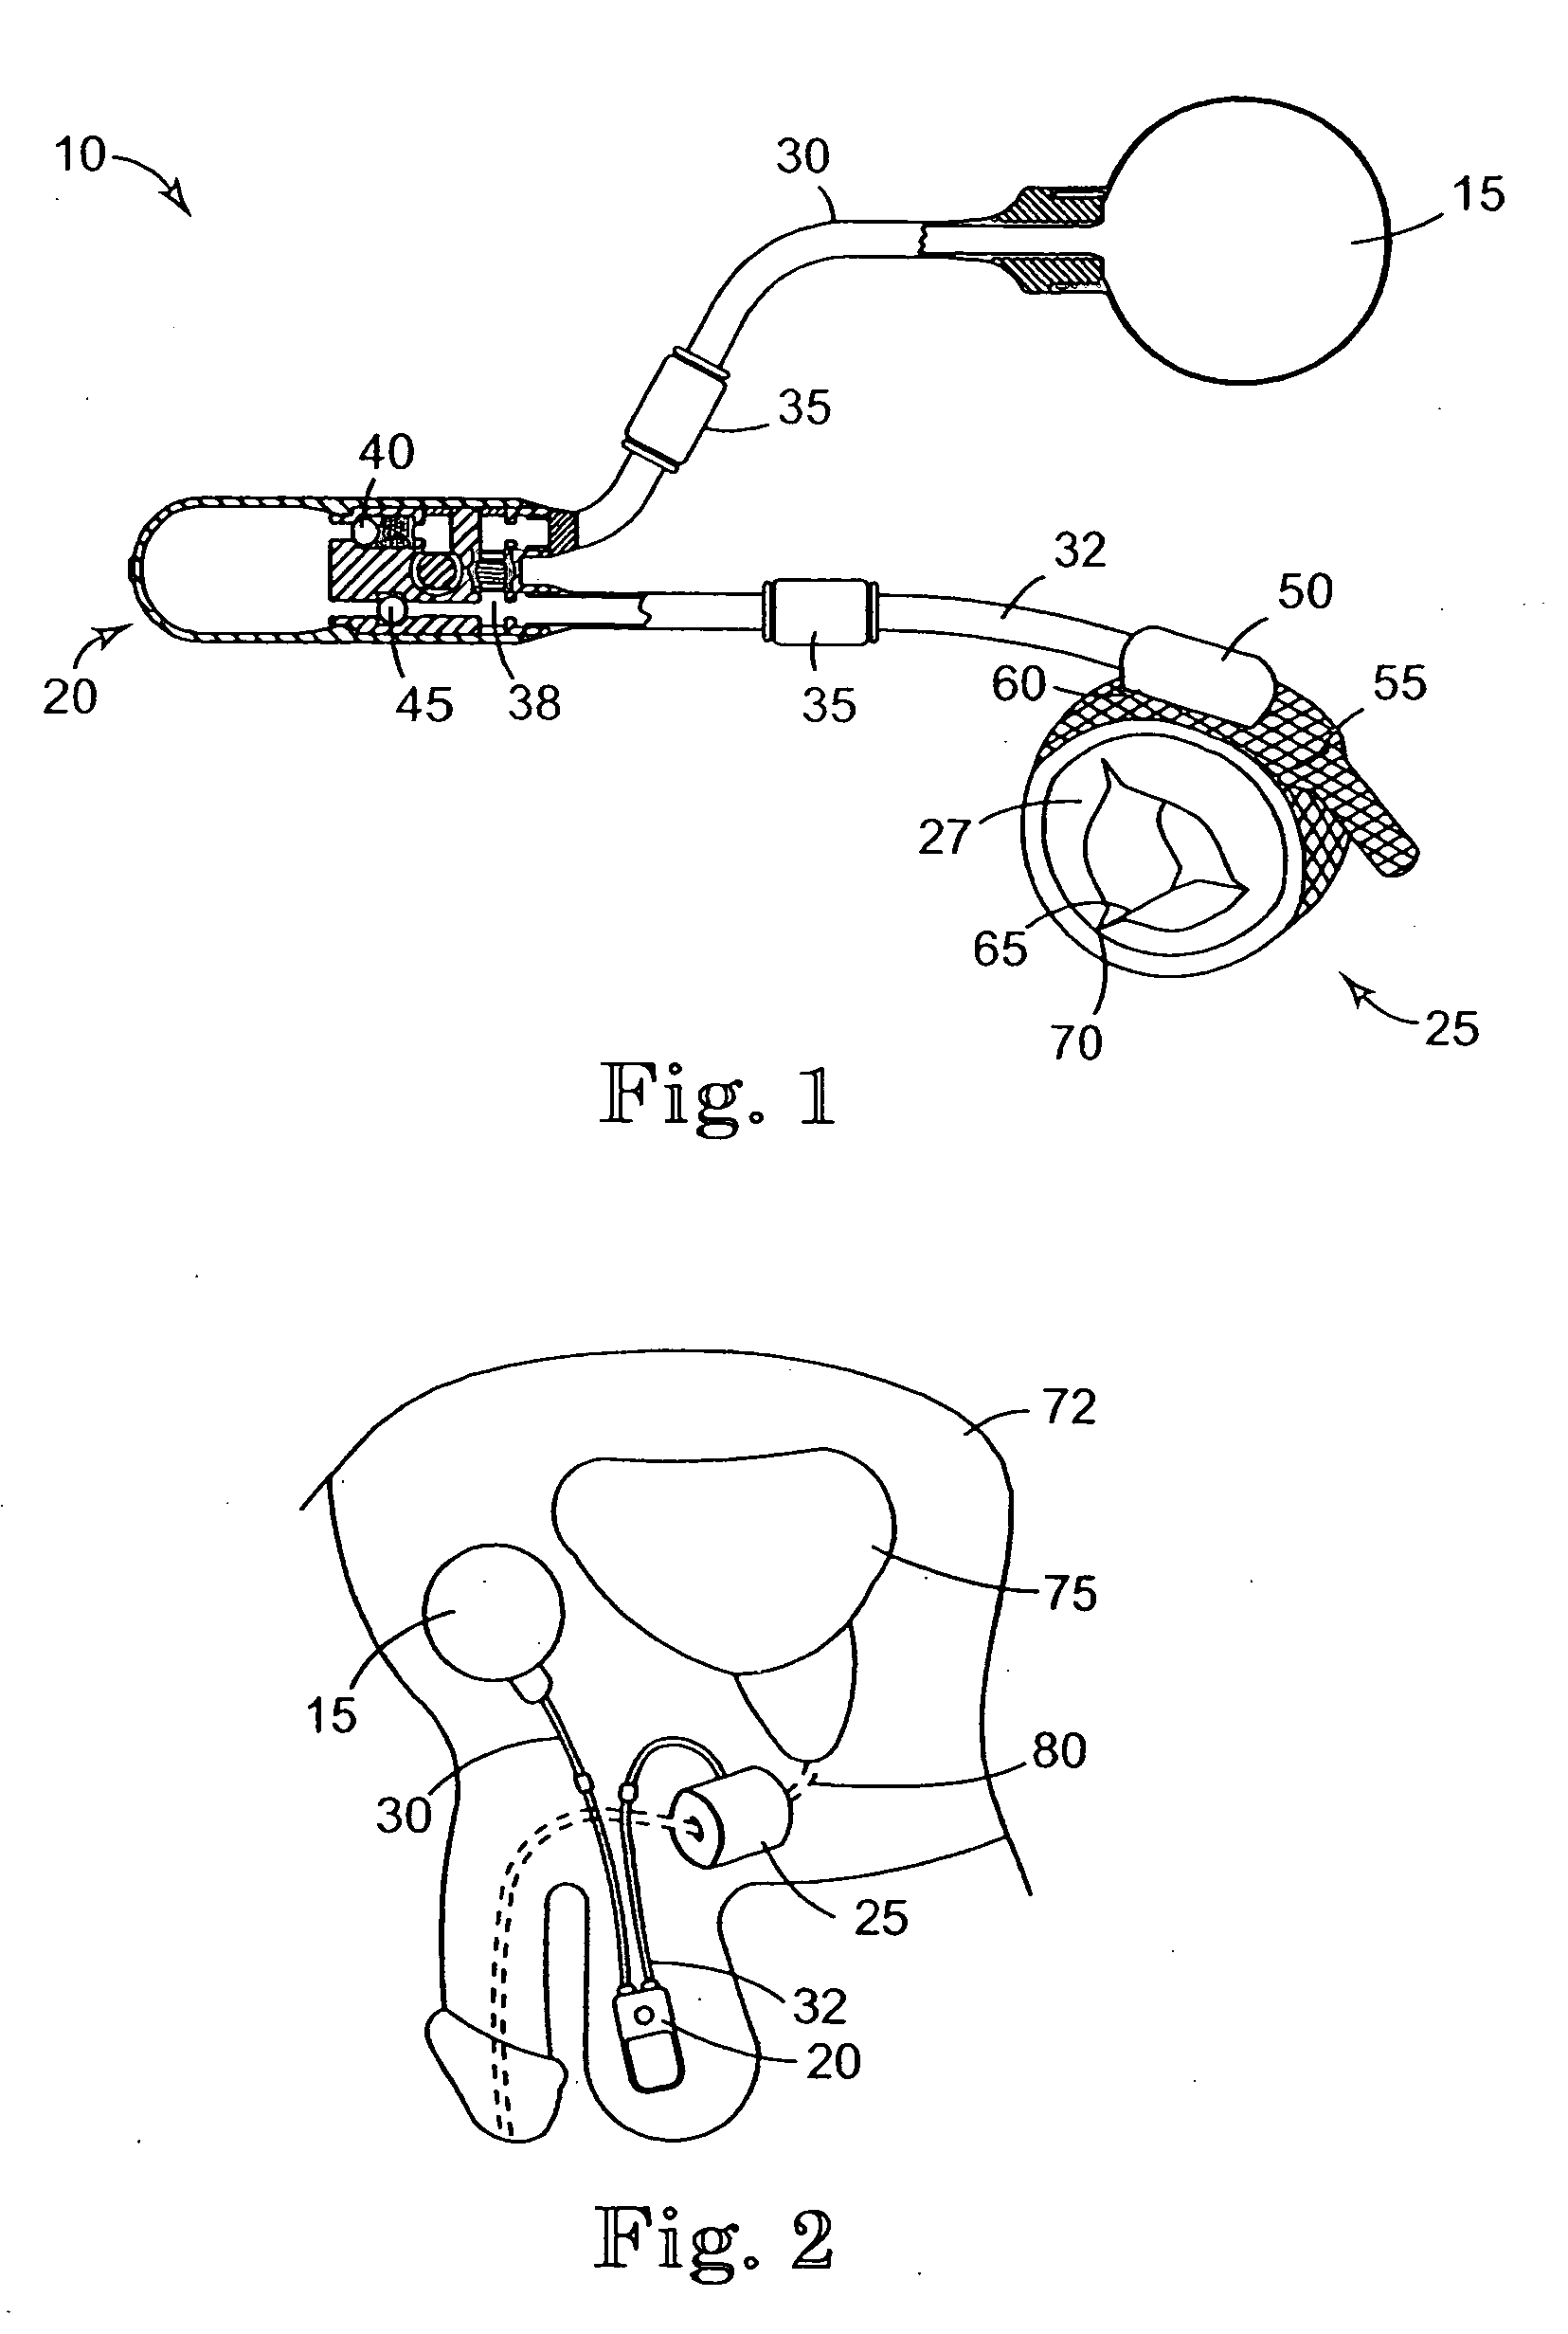 Parylene coated components for artificial sphincters